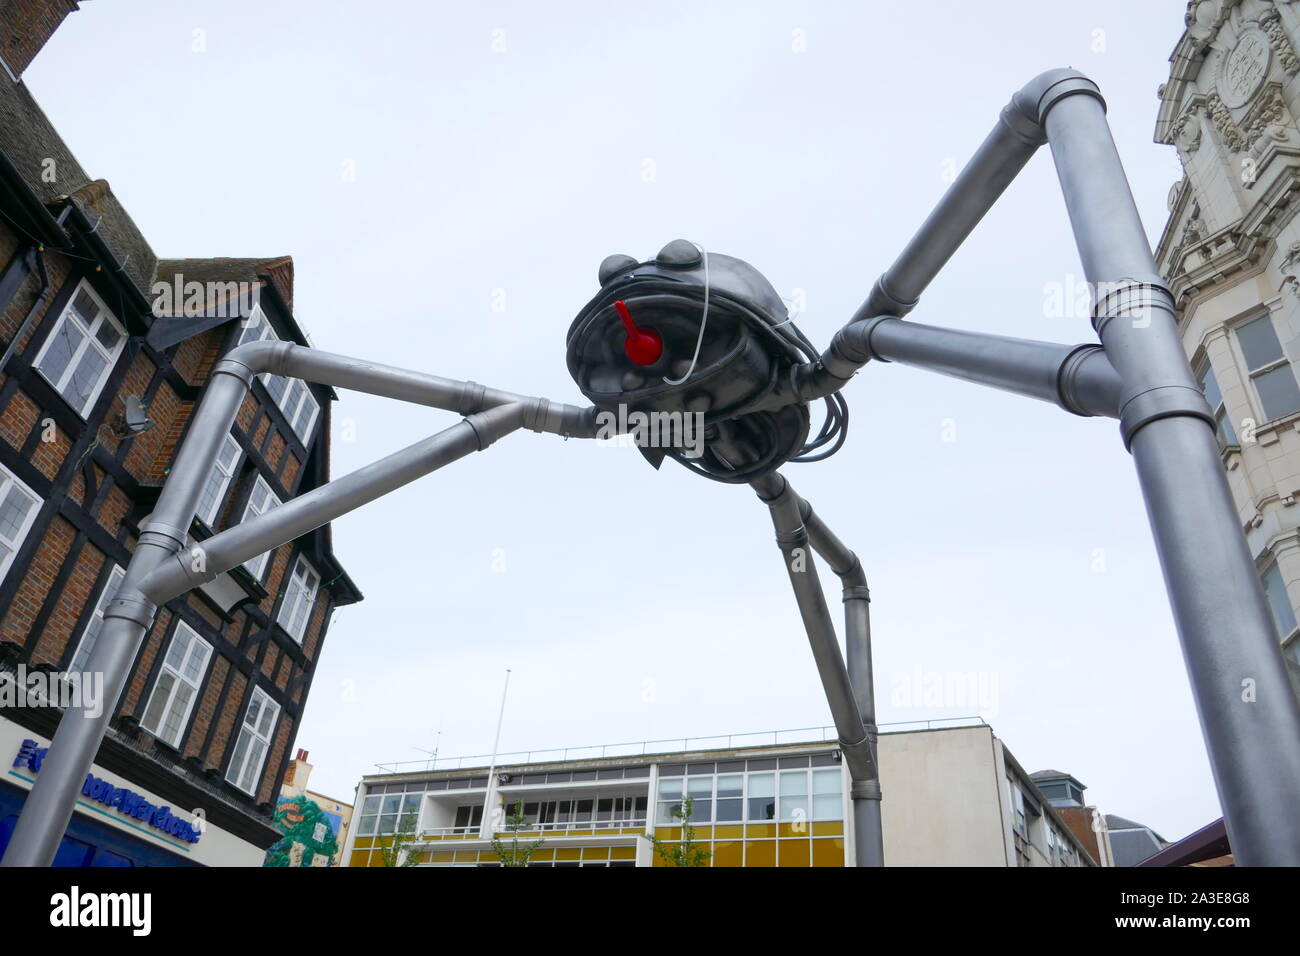 A Science Fiction Fair in Bromley displays a Martian War Machine from the Bromley born author H. G. Wells novel War of the Worlds. Stock Photo